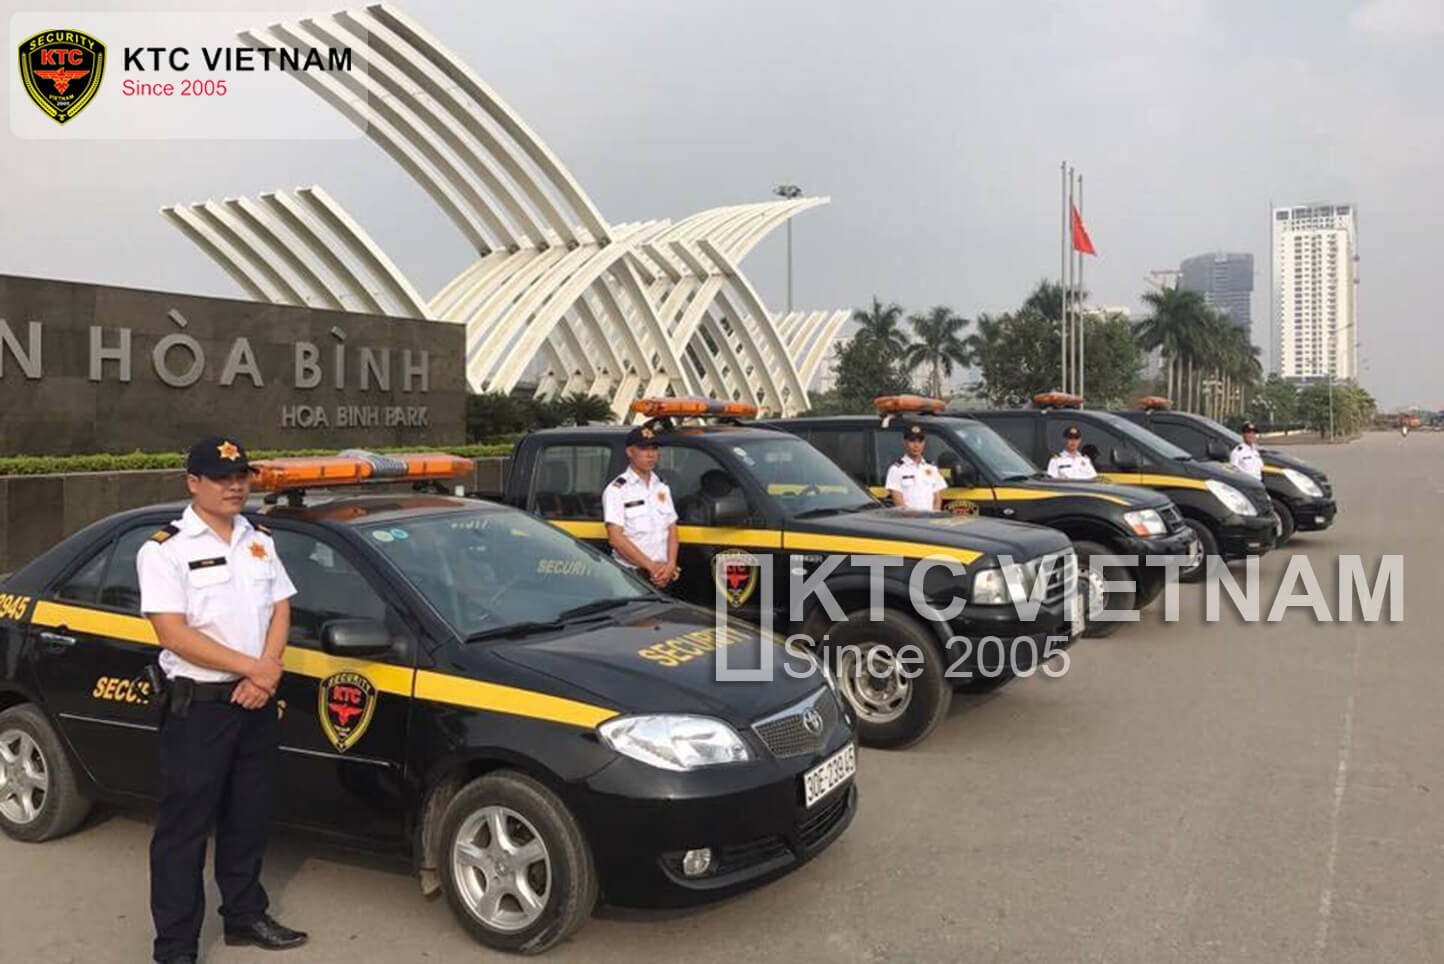 Security Services for Buildings in Vietnam